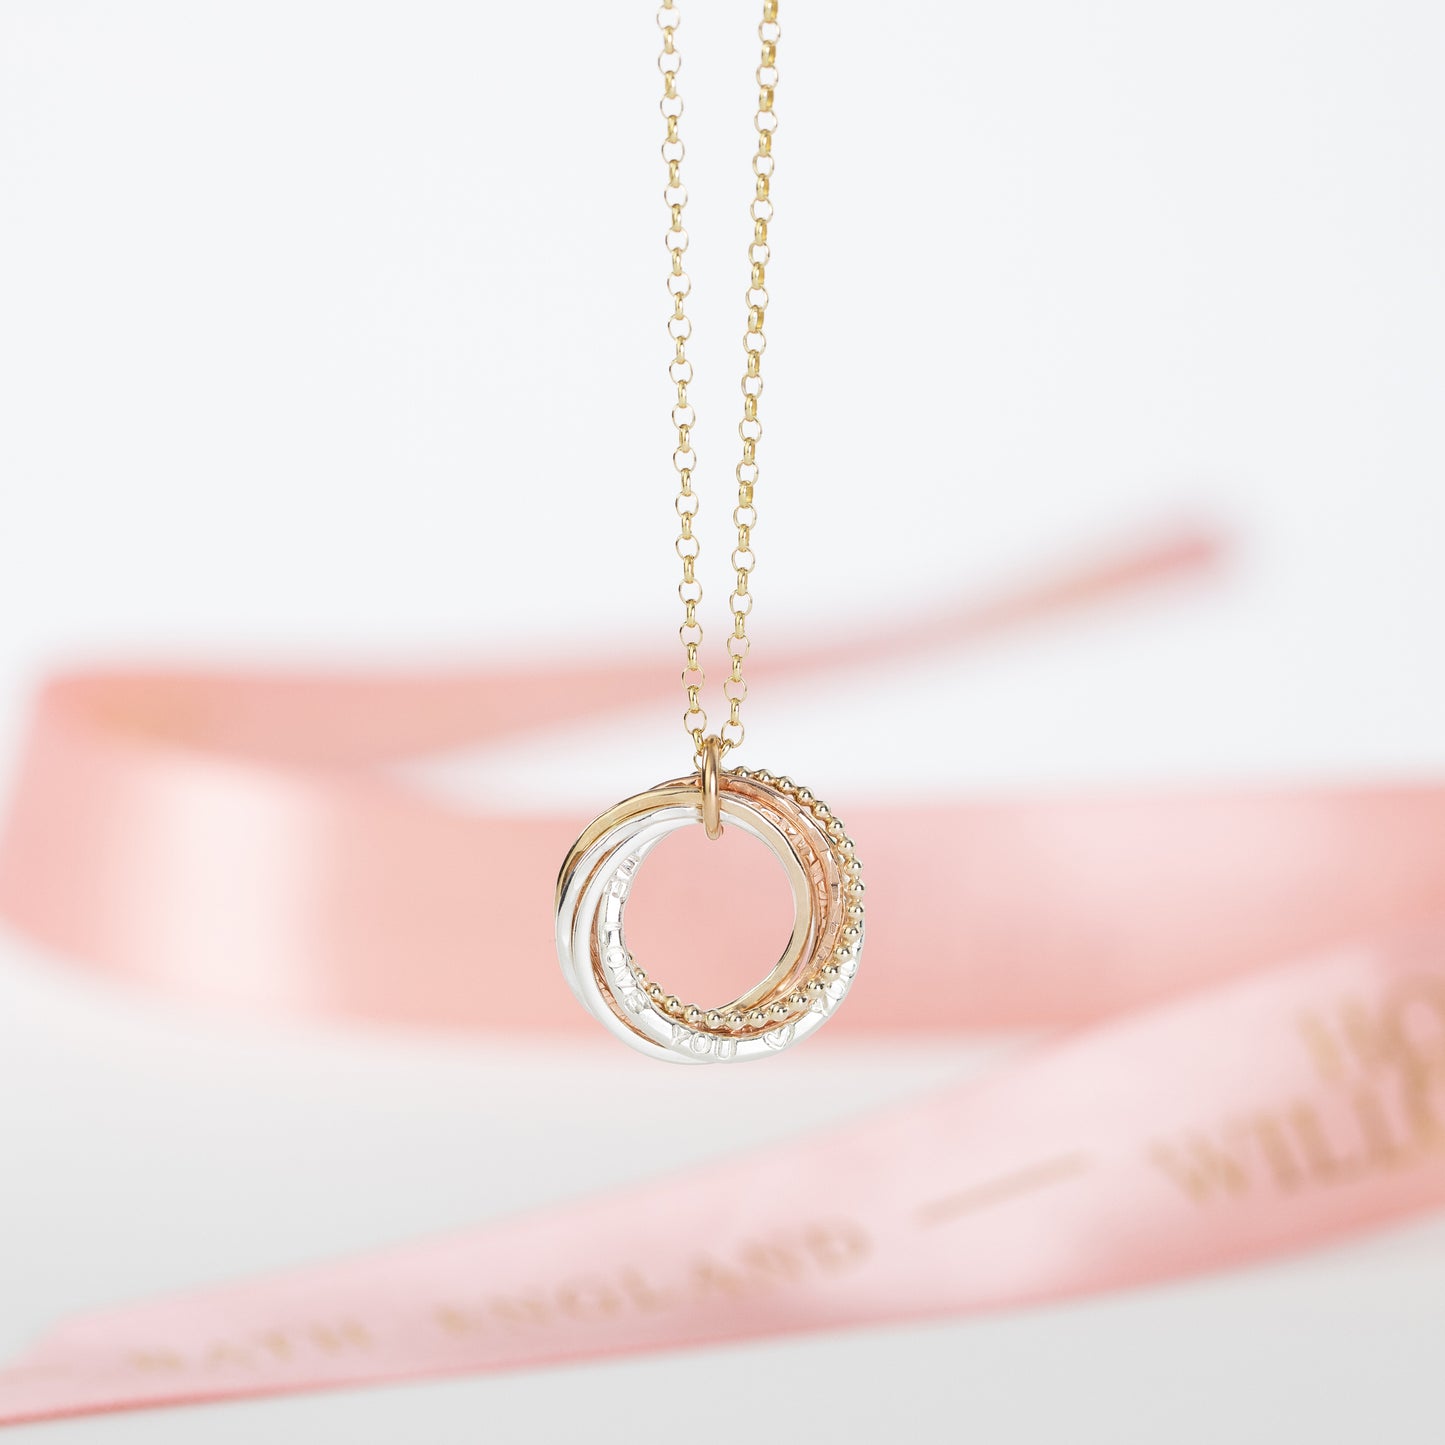 Personalised 70th Birthday Necklace - The Original 7 Links for 7 Decades Necklace - 9kt Gold, Rose Gold, Silver